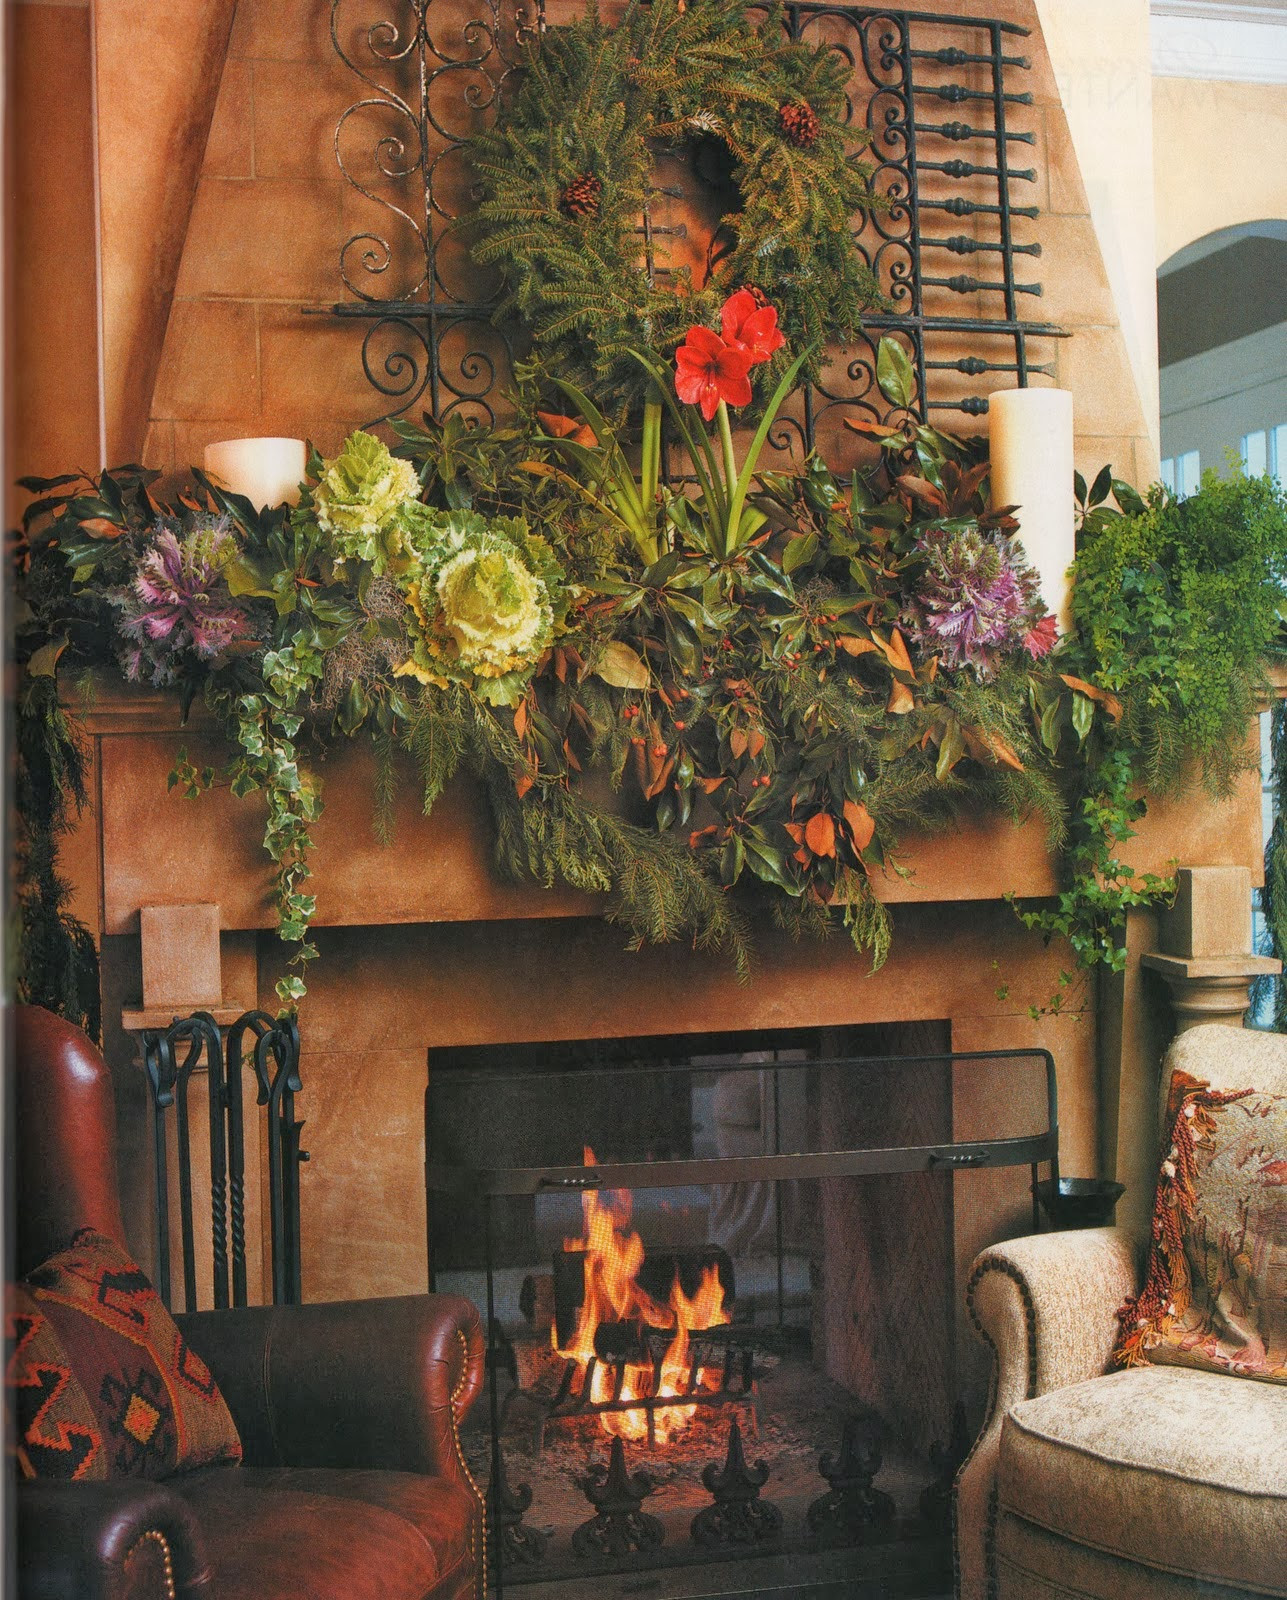 Fireplace Mantel Decorations For Christmas
 Shabby in love Inspiring Christmas Fireplace Mantel